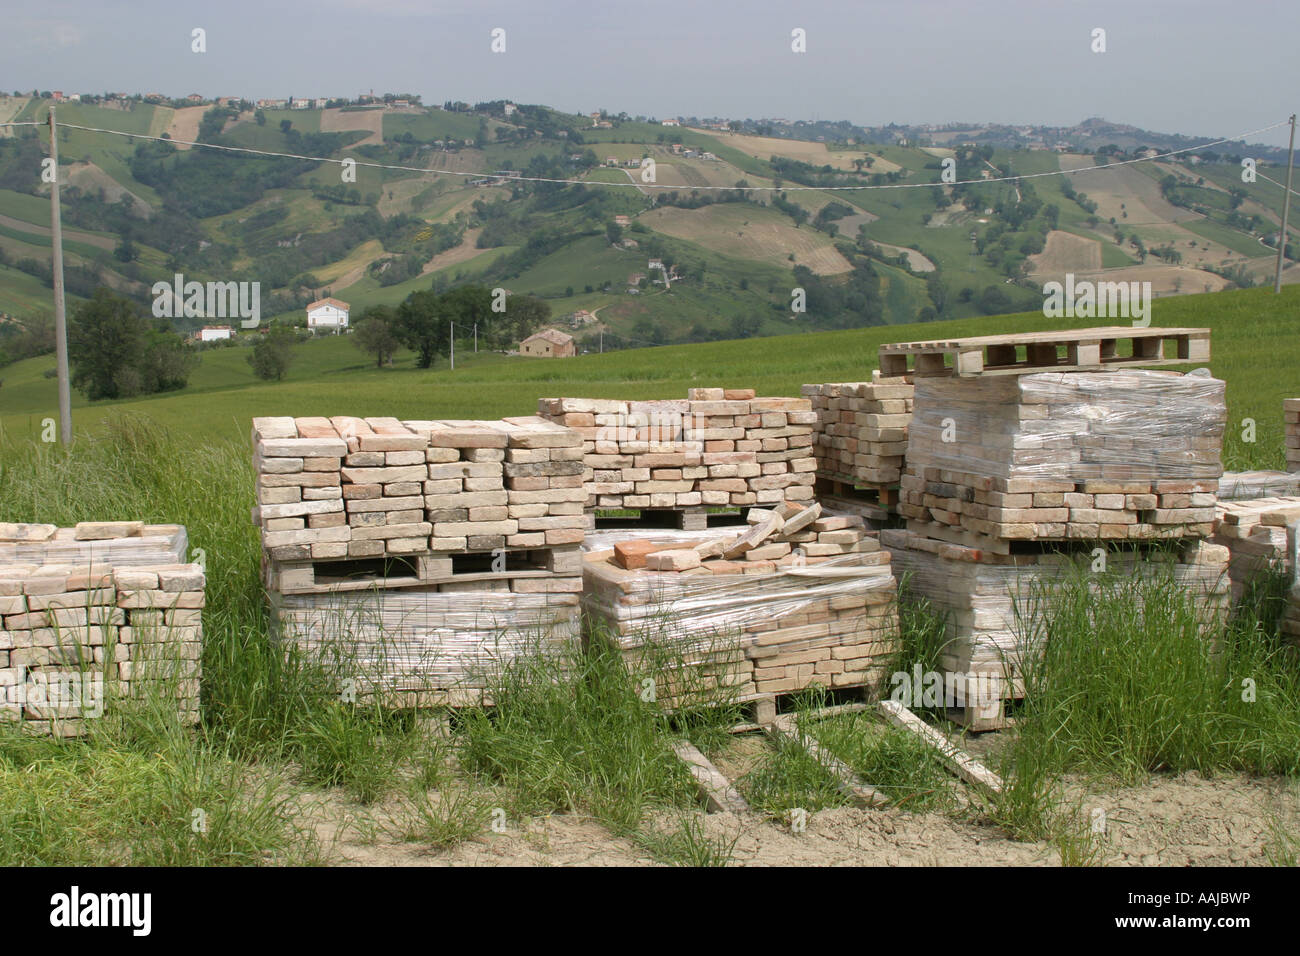 Antique tiles and bricks  are eagerly sort after for building and restoration work in Le Marche Italy Stock Photo